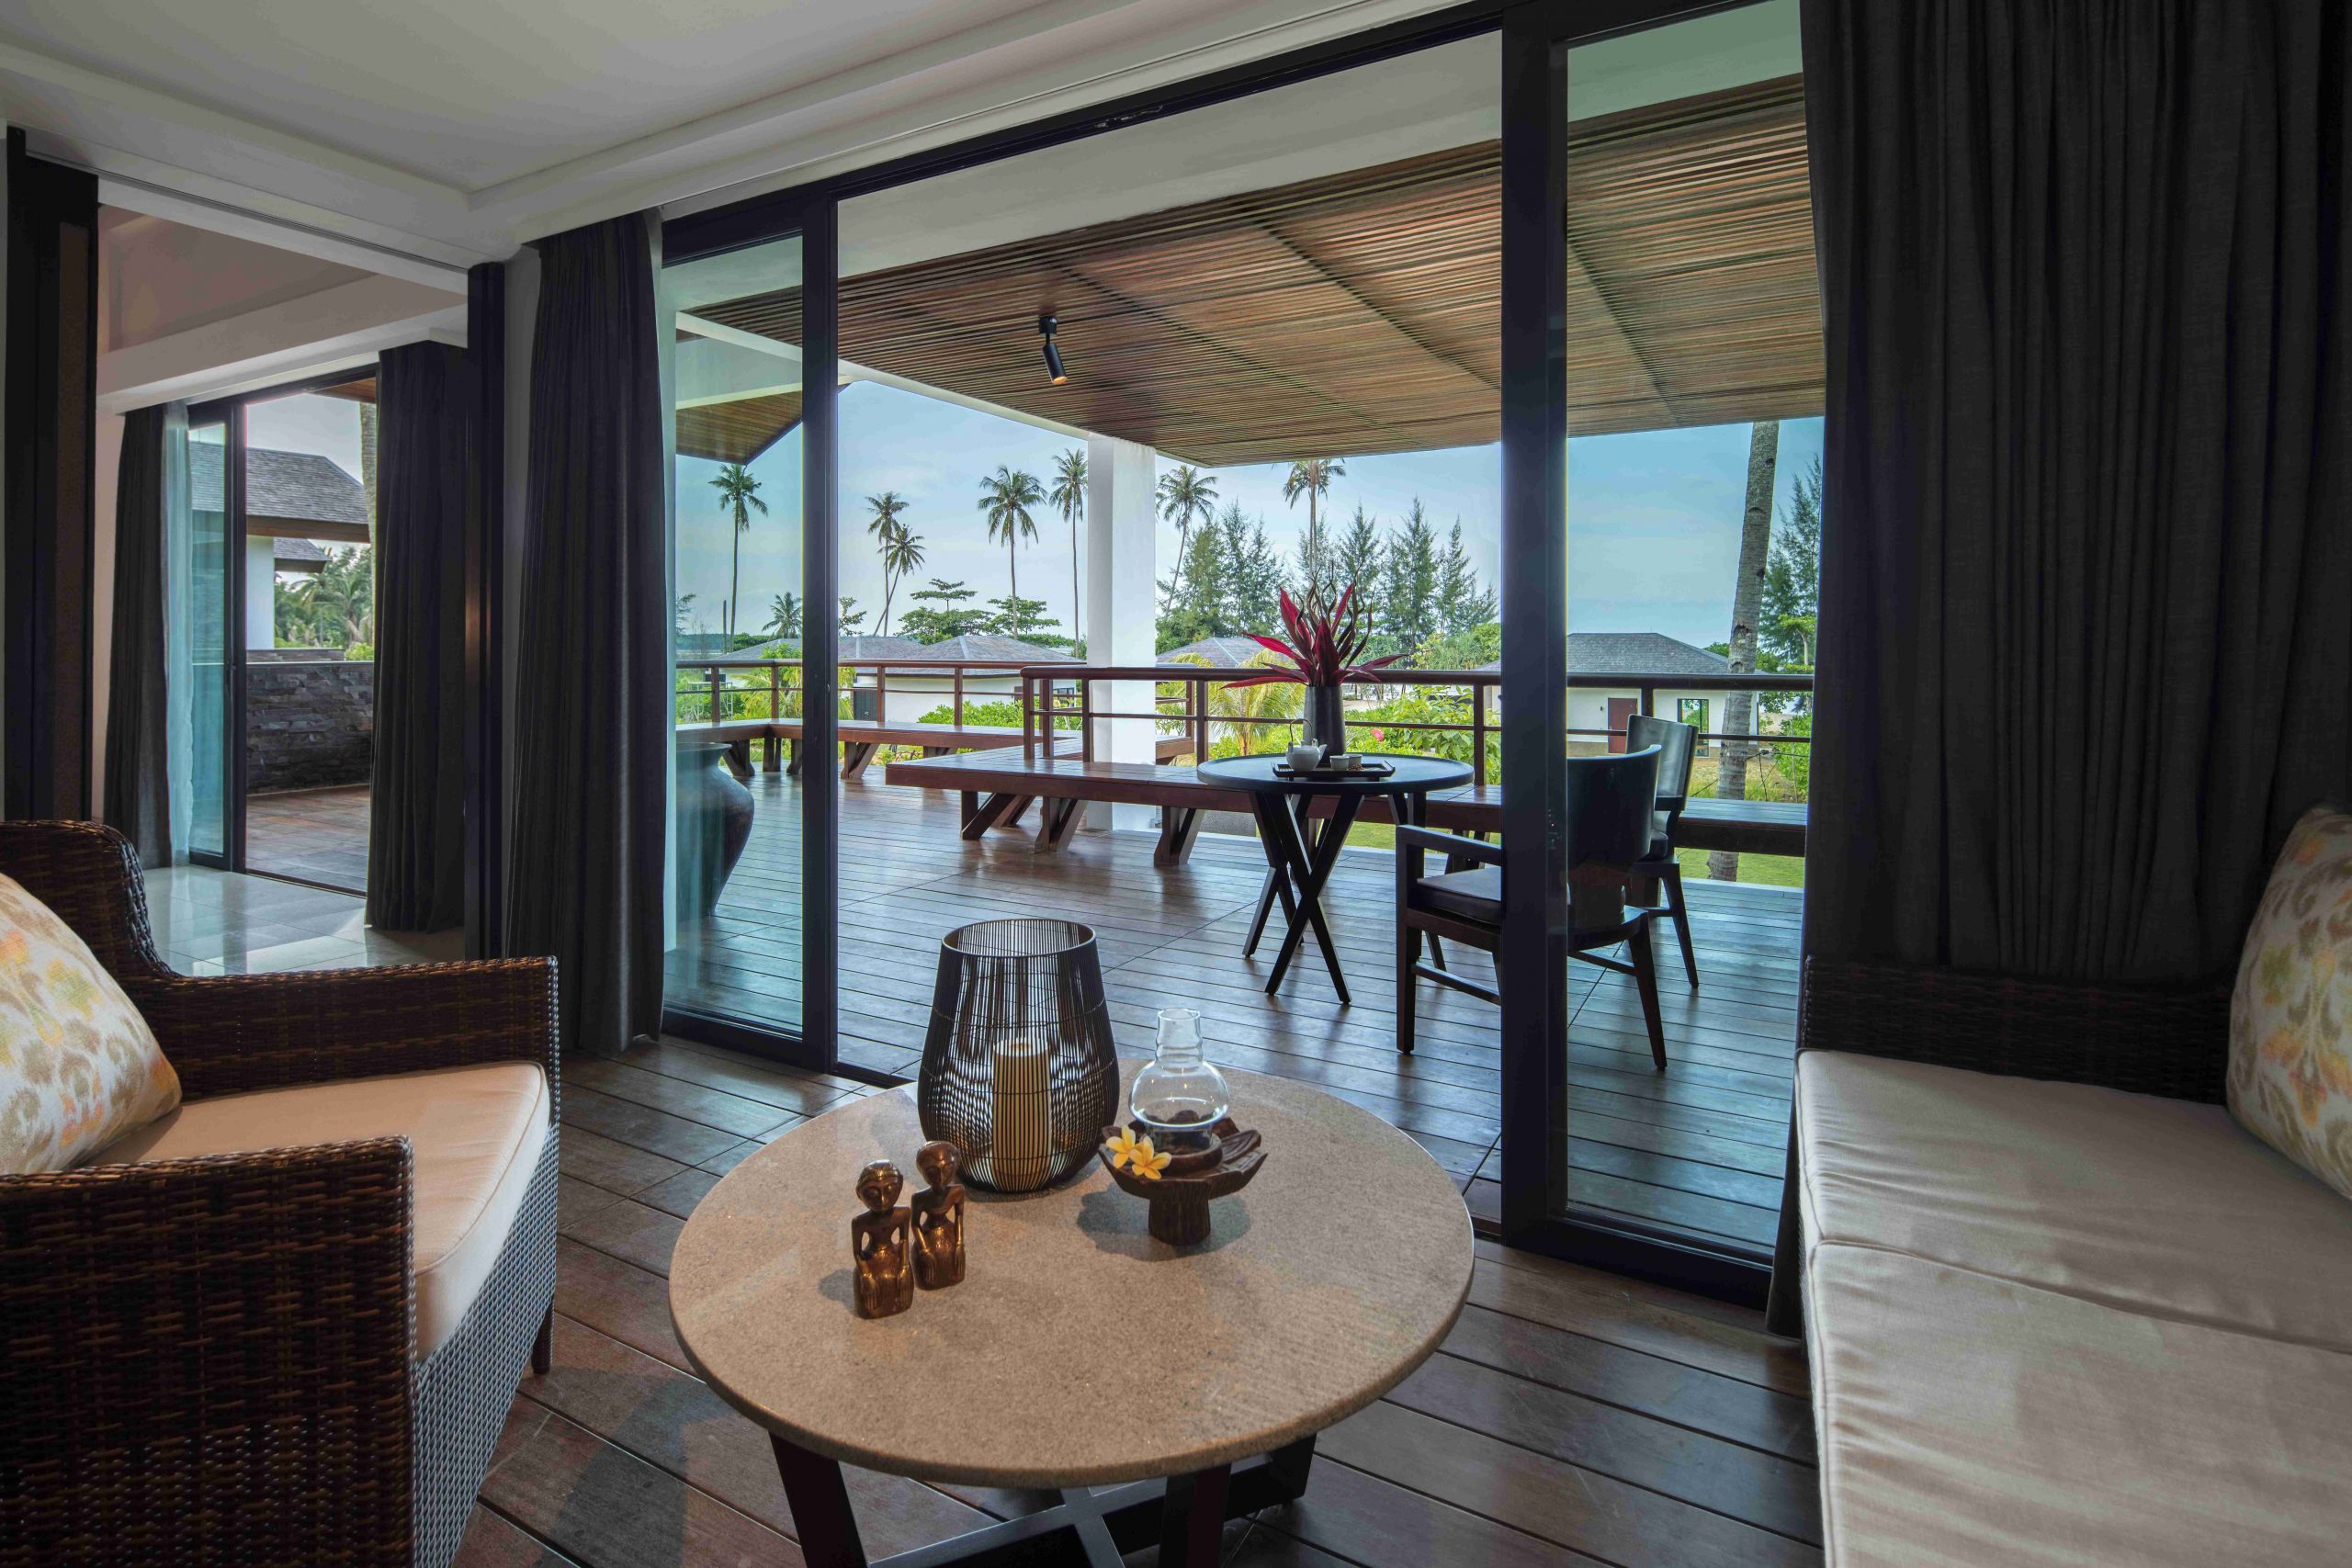 , The Residence Bintan by Cenizaro allows you to reset in nature